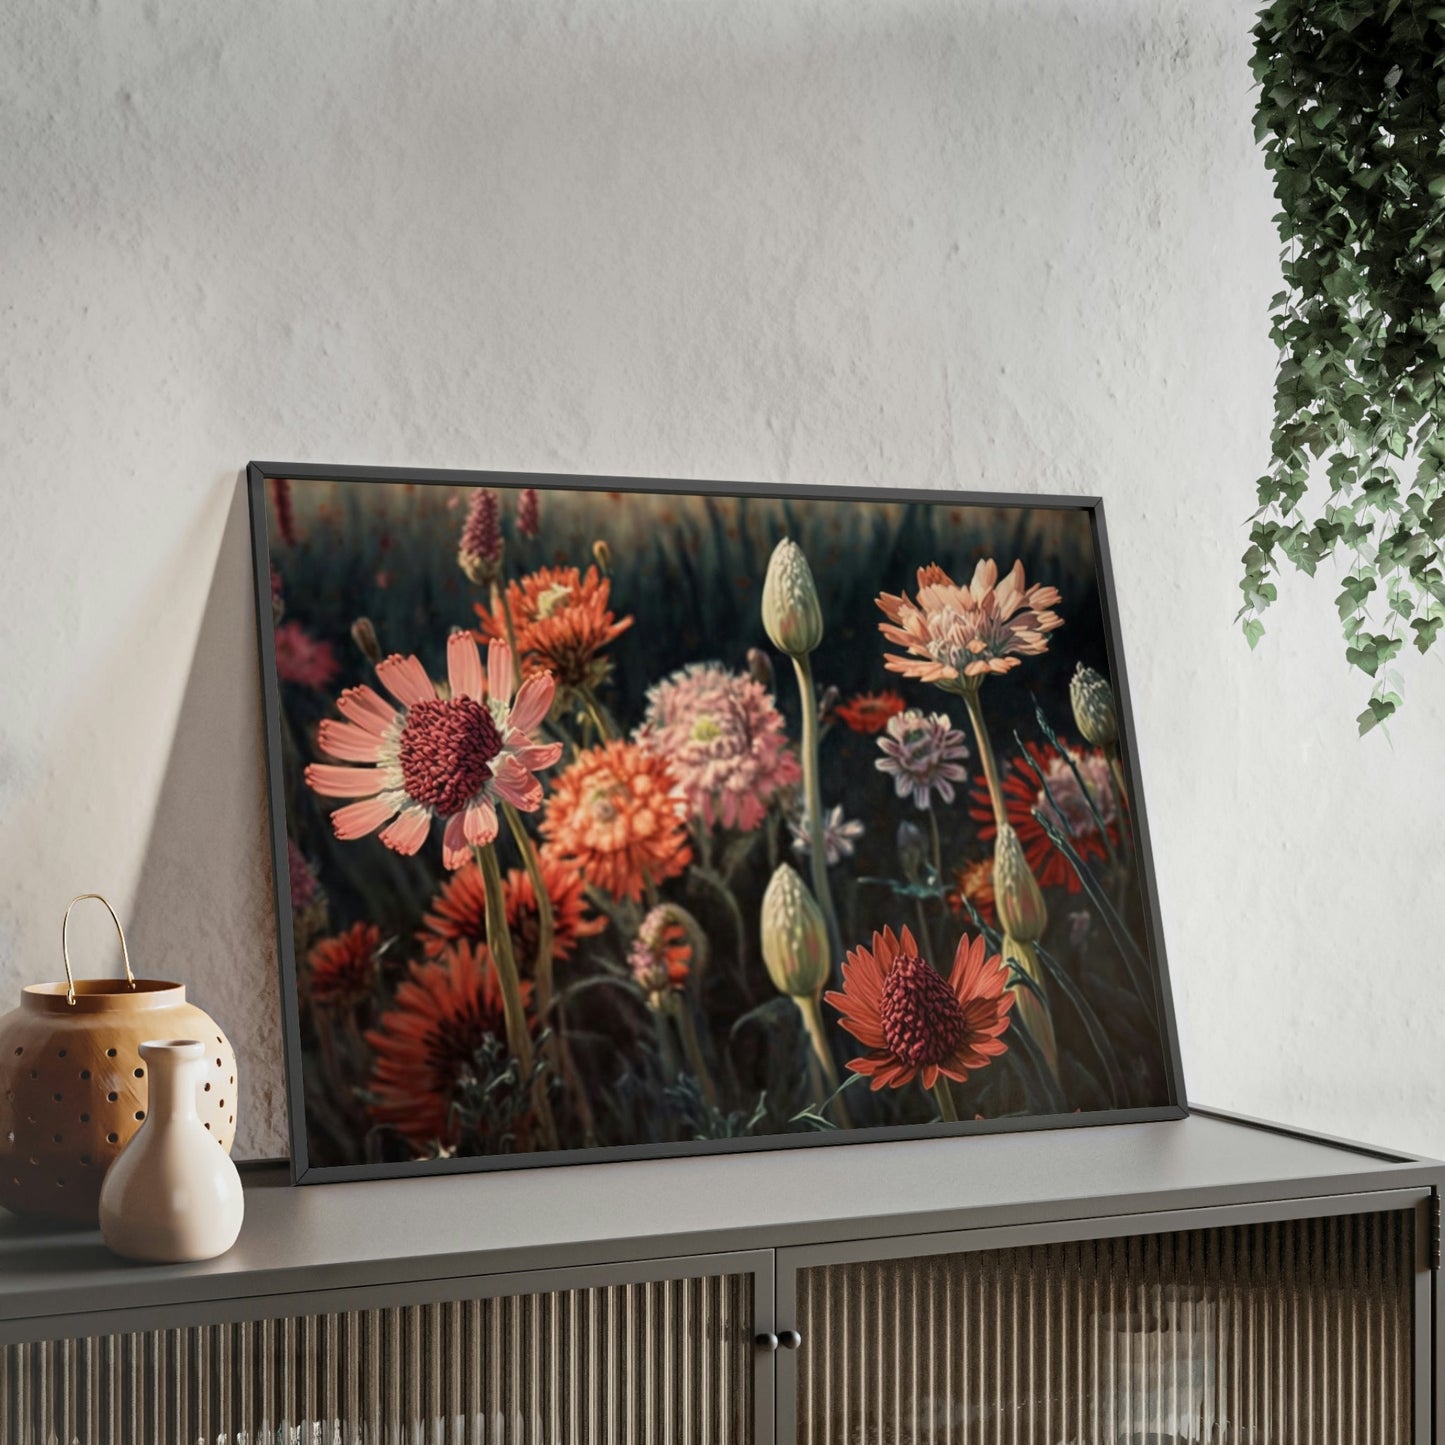 Vibrant Floral Delight: Framed Canvas & Posters Wall Art for a Splash of Color